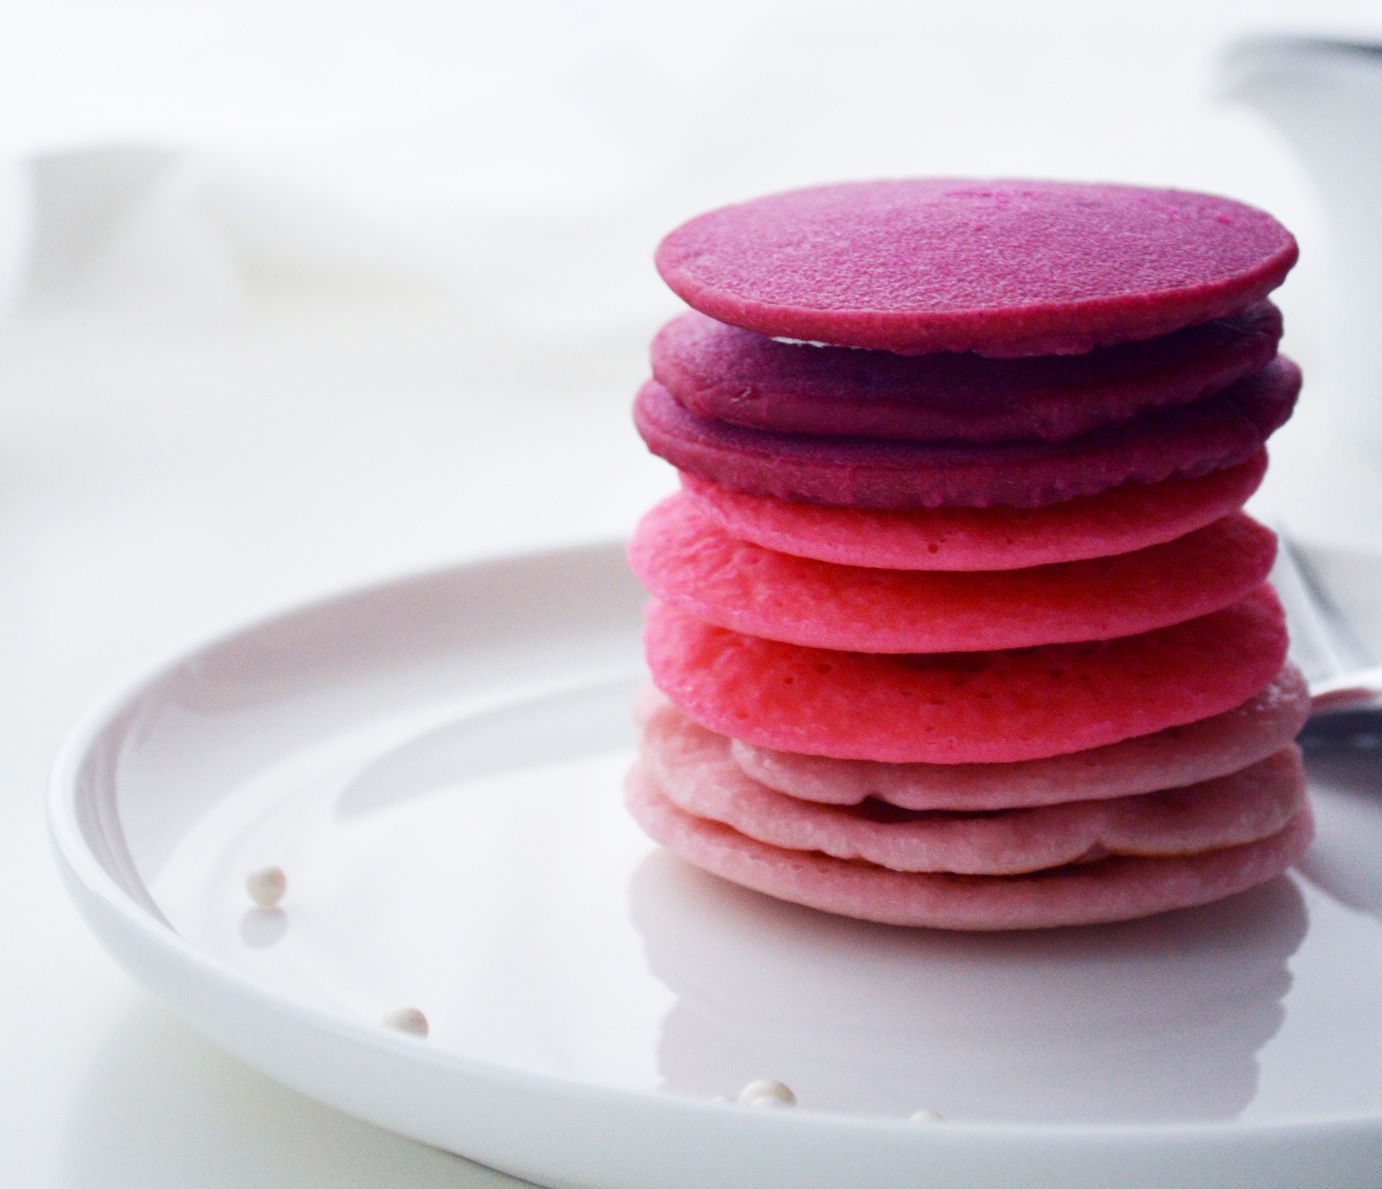 5 delicious recipes for Valentine’s Day pancakes that will really hit their sweet spot.